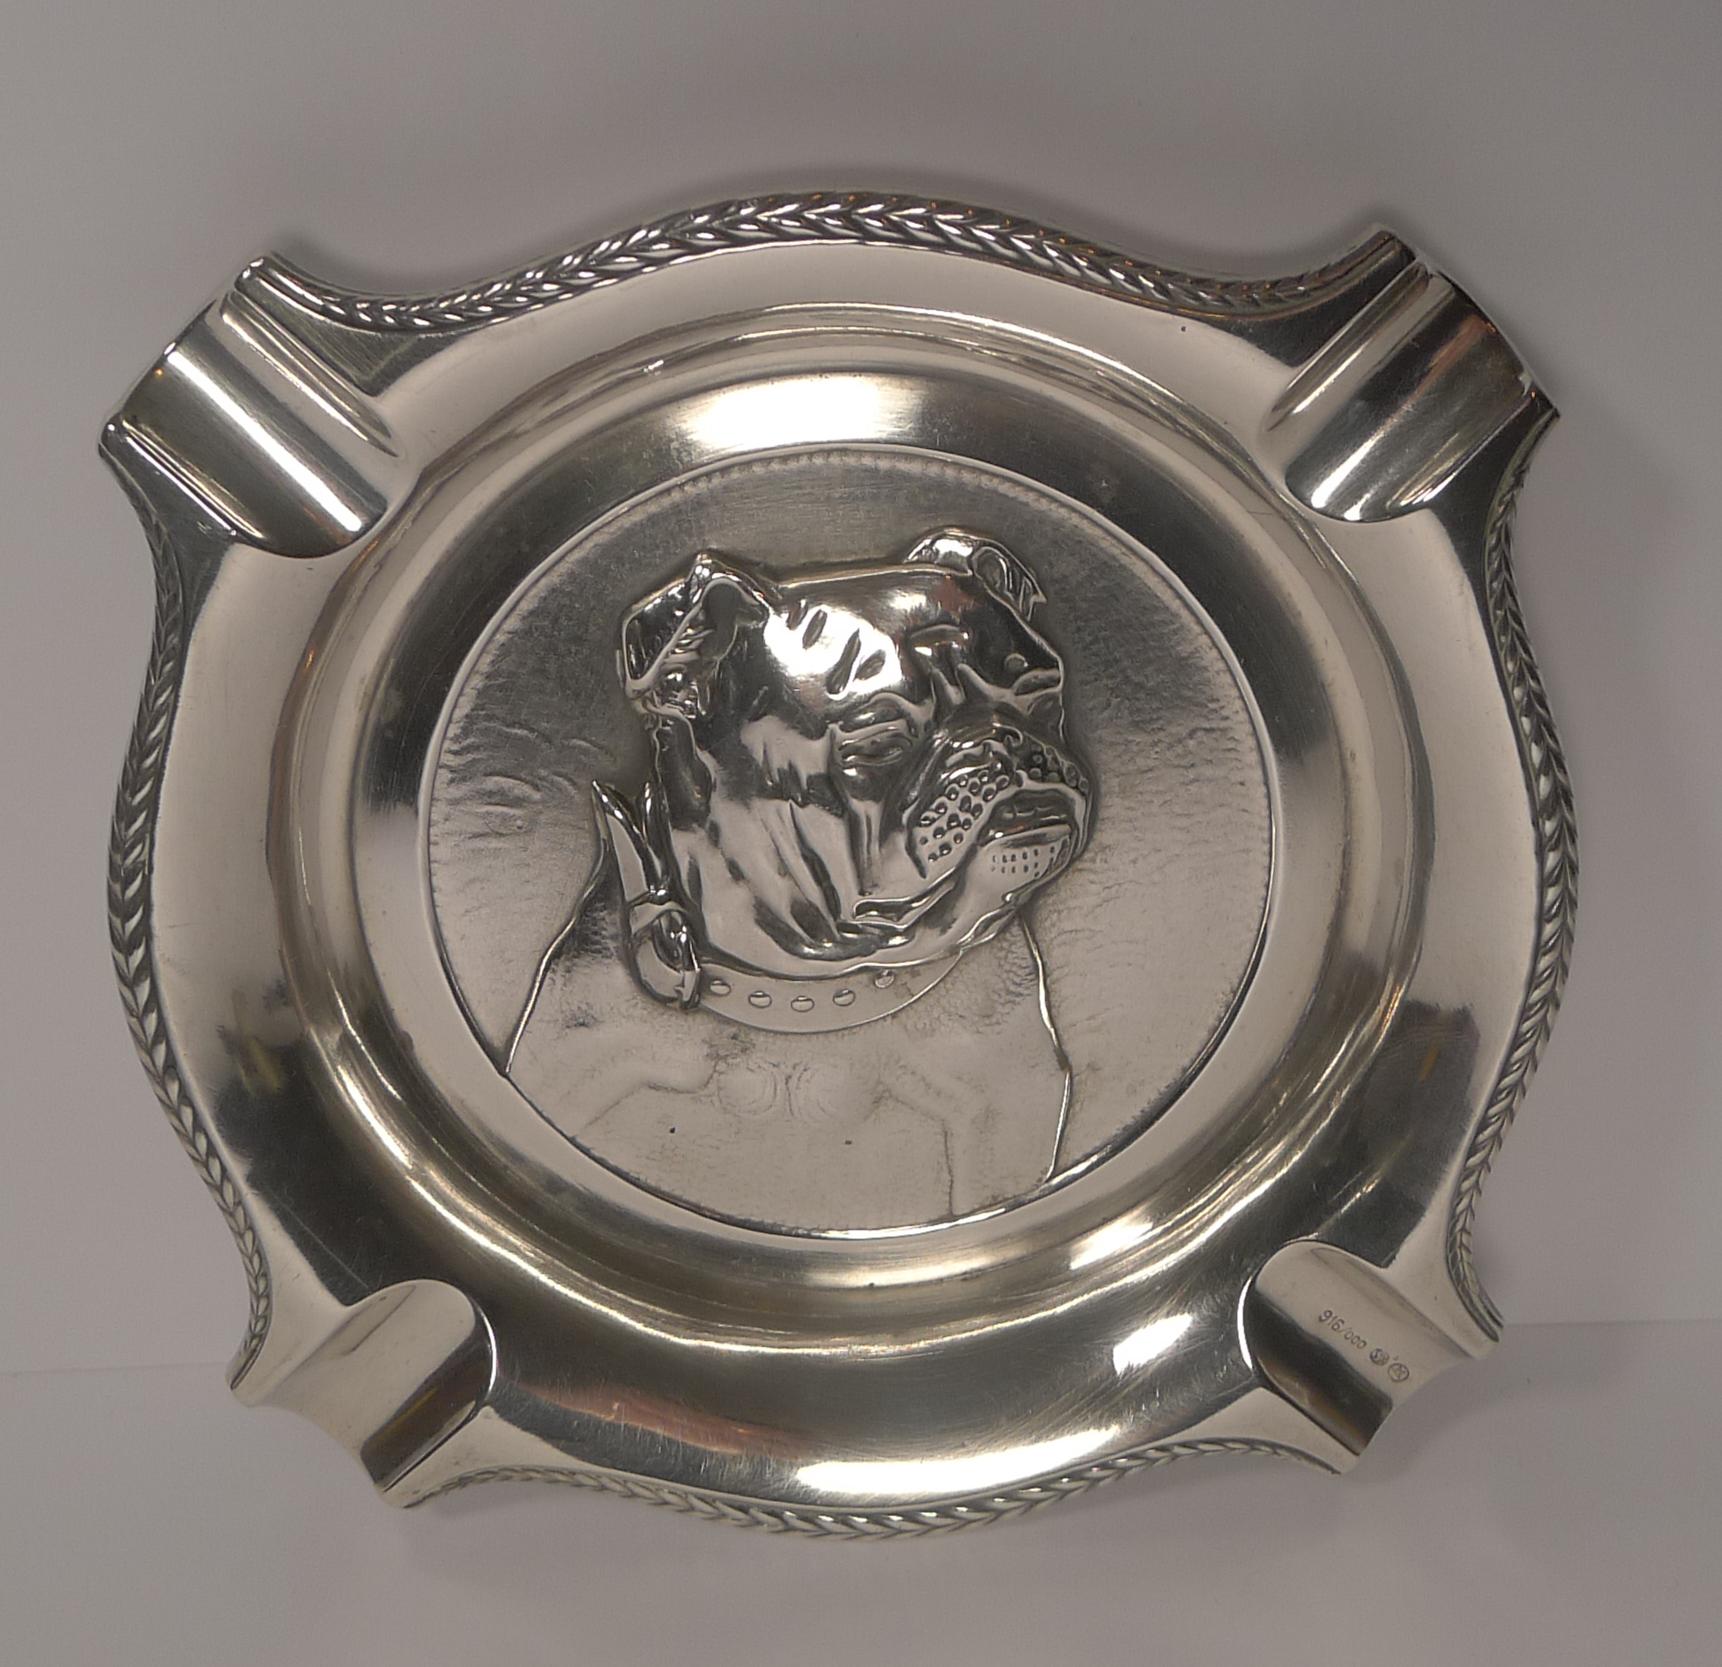 A magnificent large Spanish made silver ashtray embossed in the centre with a magnificent handsome English bulldog. 

Fully marked 916/000 in addition to the five point star for Sterling Silver (Plata De Ley). 

Art Deco in era dating to circa